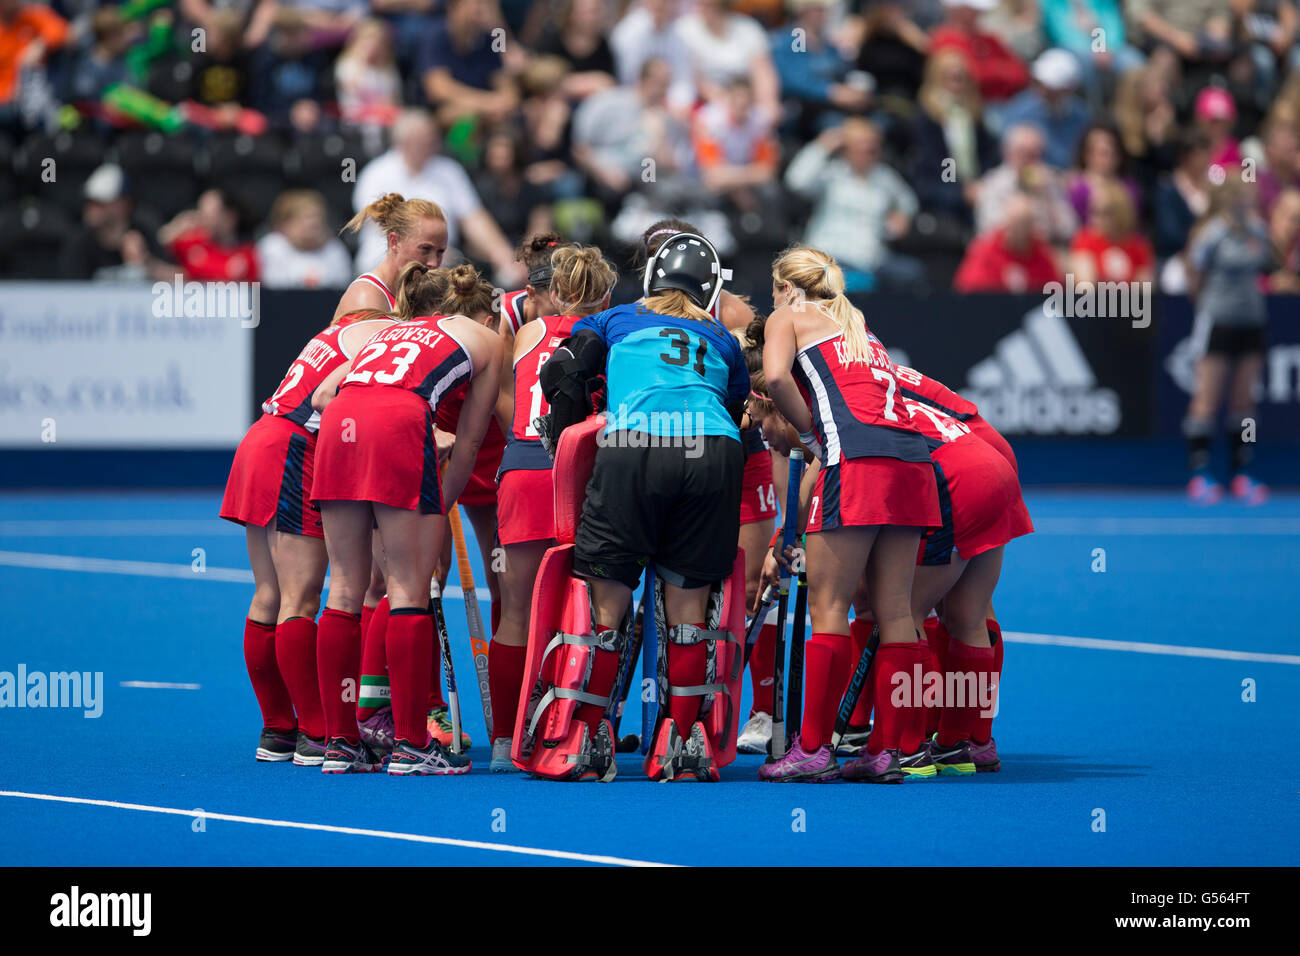 Investec Womens Hockey Champions Trophy 2016, Queen Elizabeth Olympic Park, June 2016. USA team huddle. Stock Photo